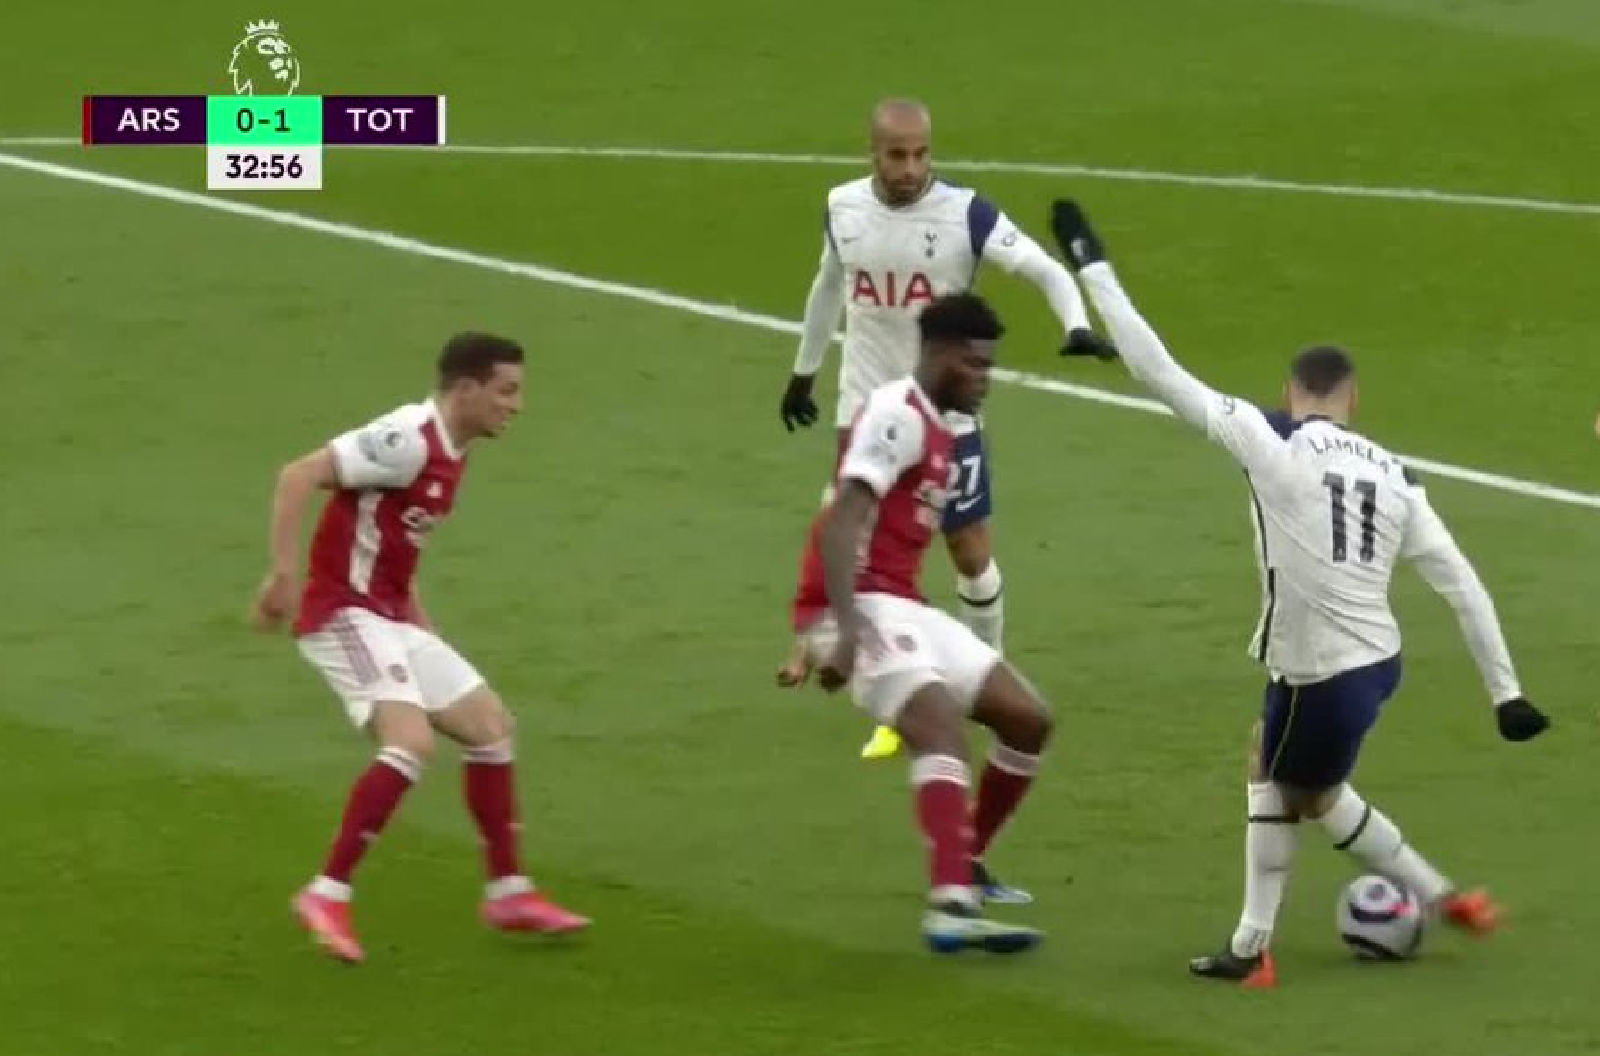 Internet responds to witnessing the most Erik Lamela performance of all time